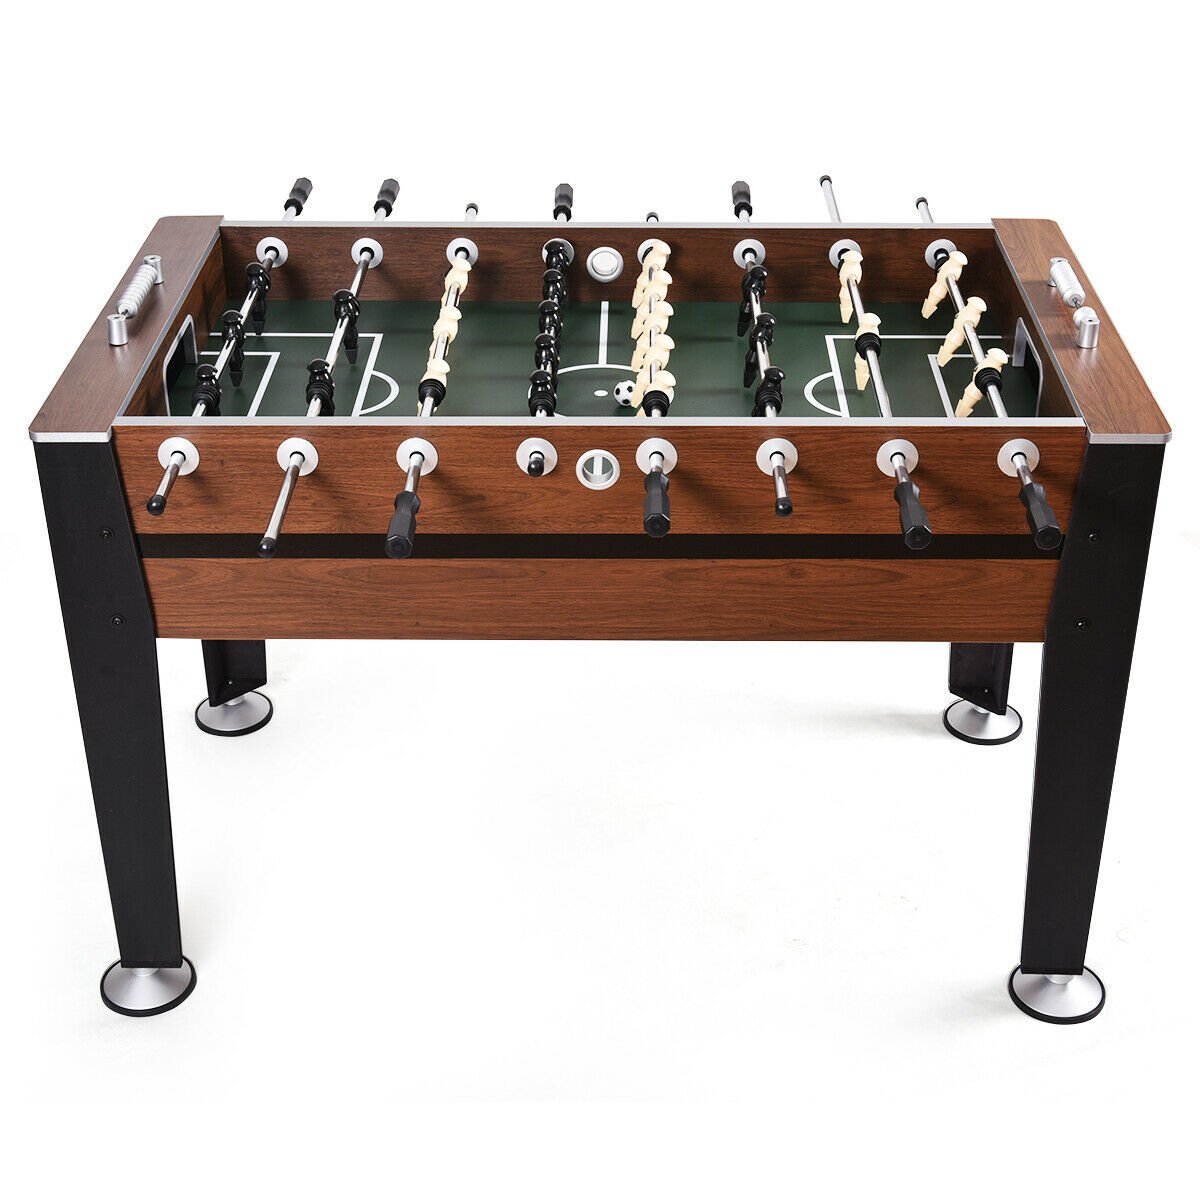 54" Free Stading Football Table Set for Kids & Adults - Cherish Home